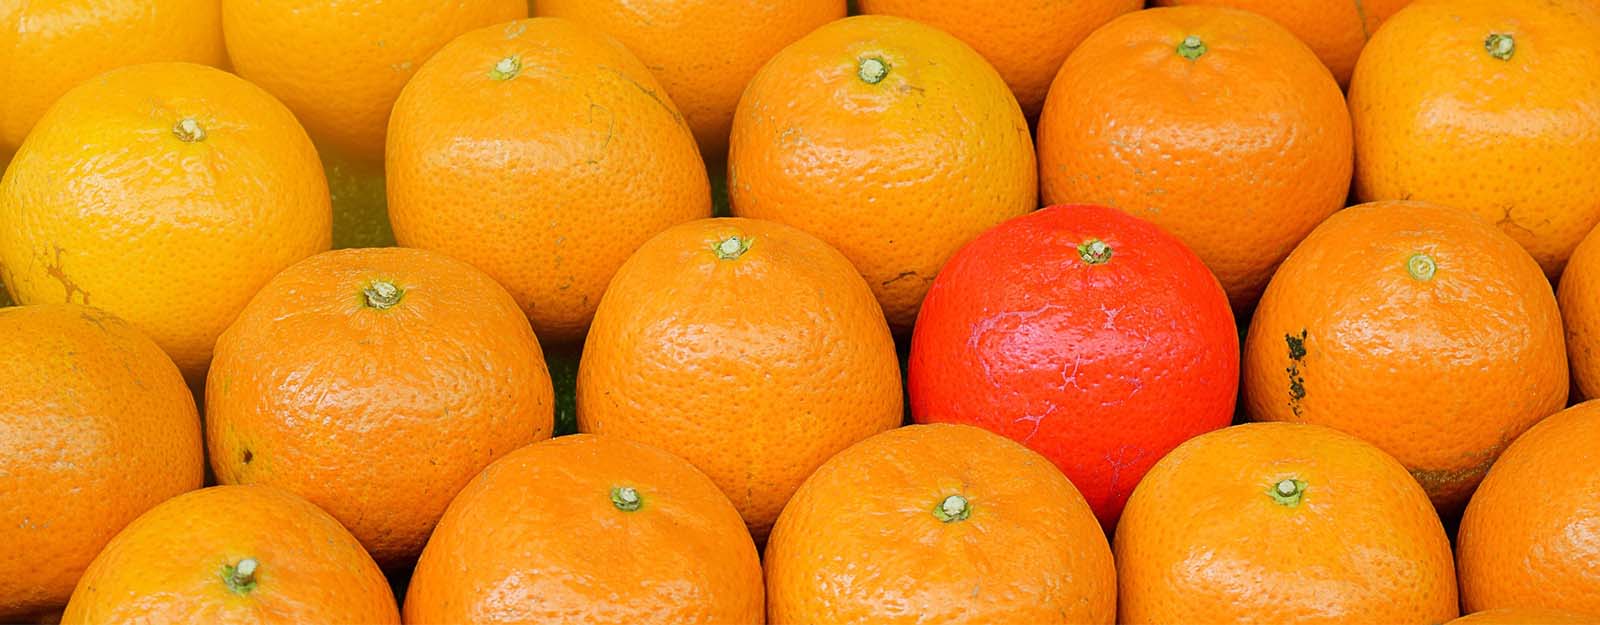 Image of stacked oranges, each identical in color except for one which is a brighter orange.  Union State Bank commercial business services.